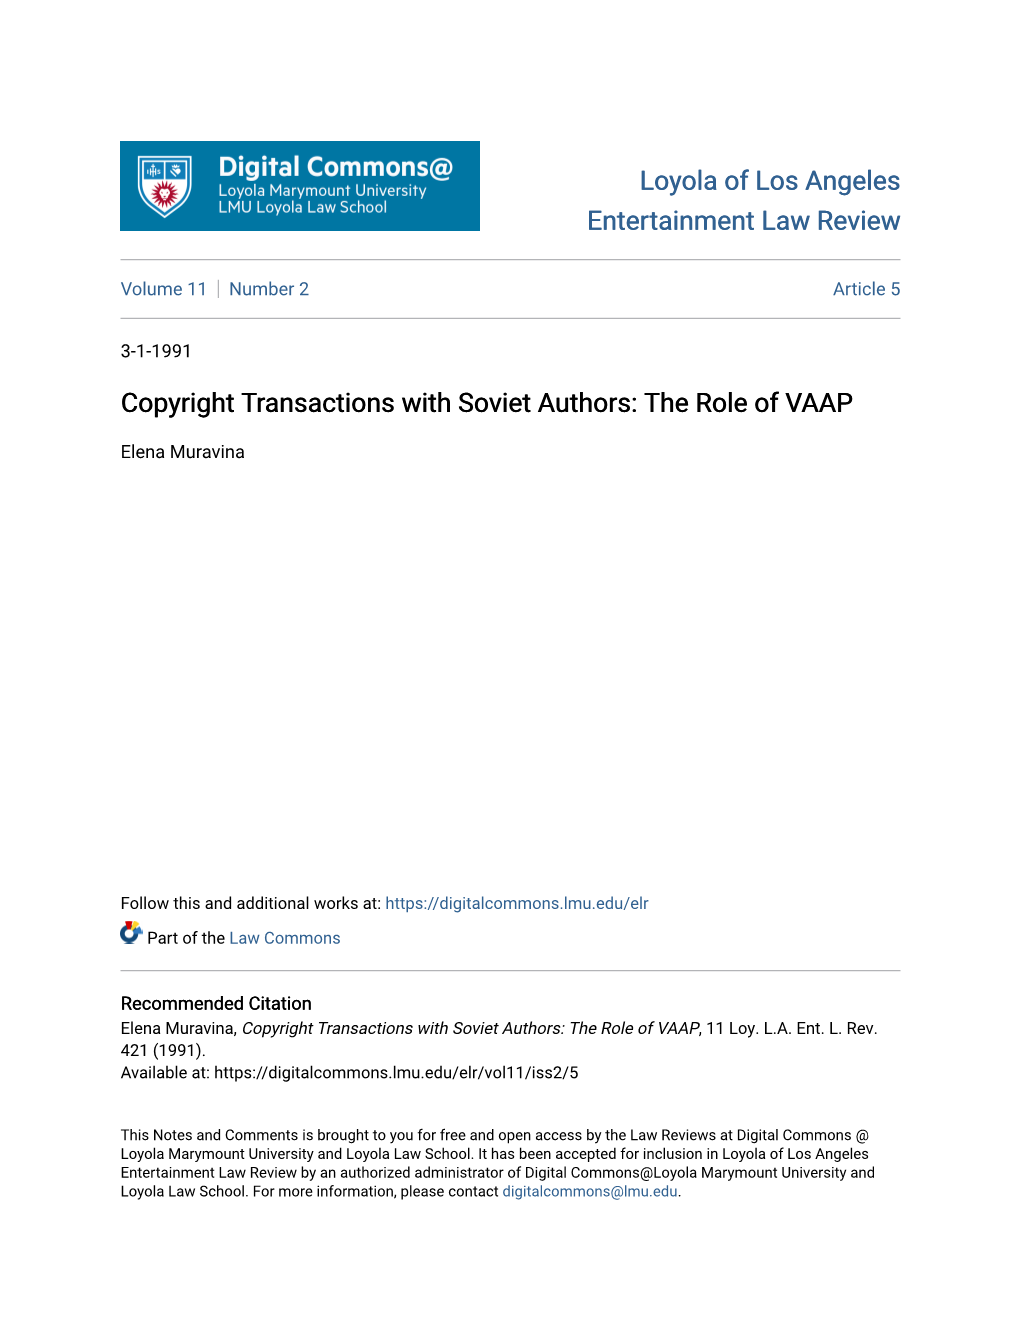 Copyright Transactions with Soviet Authors: the Role of VAAP